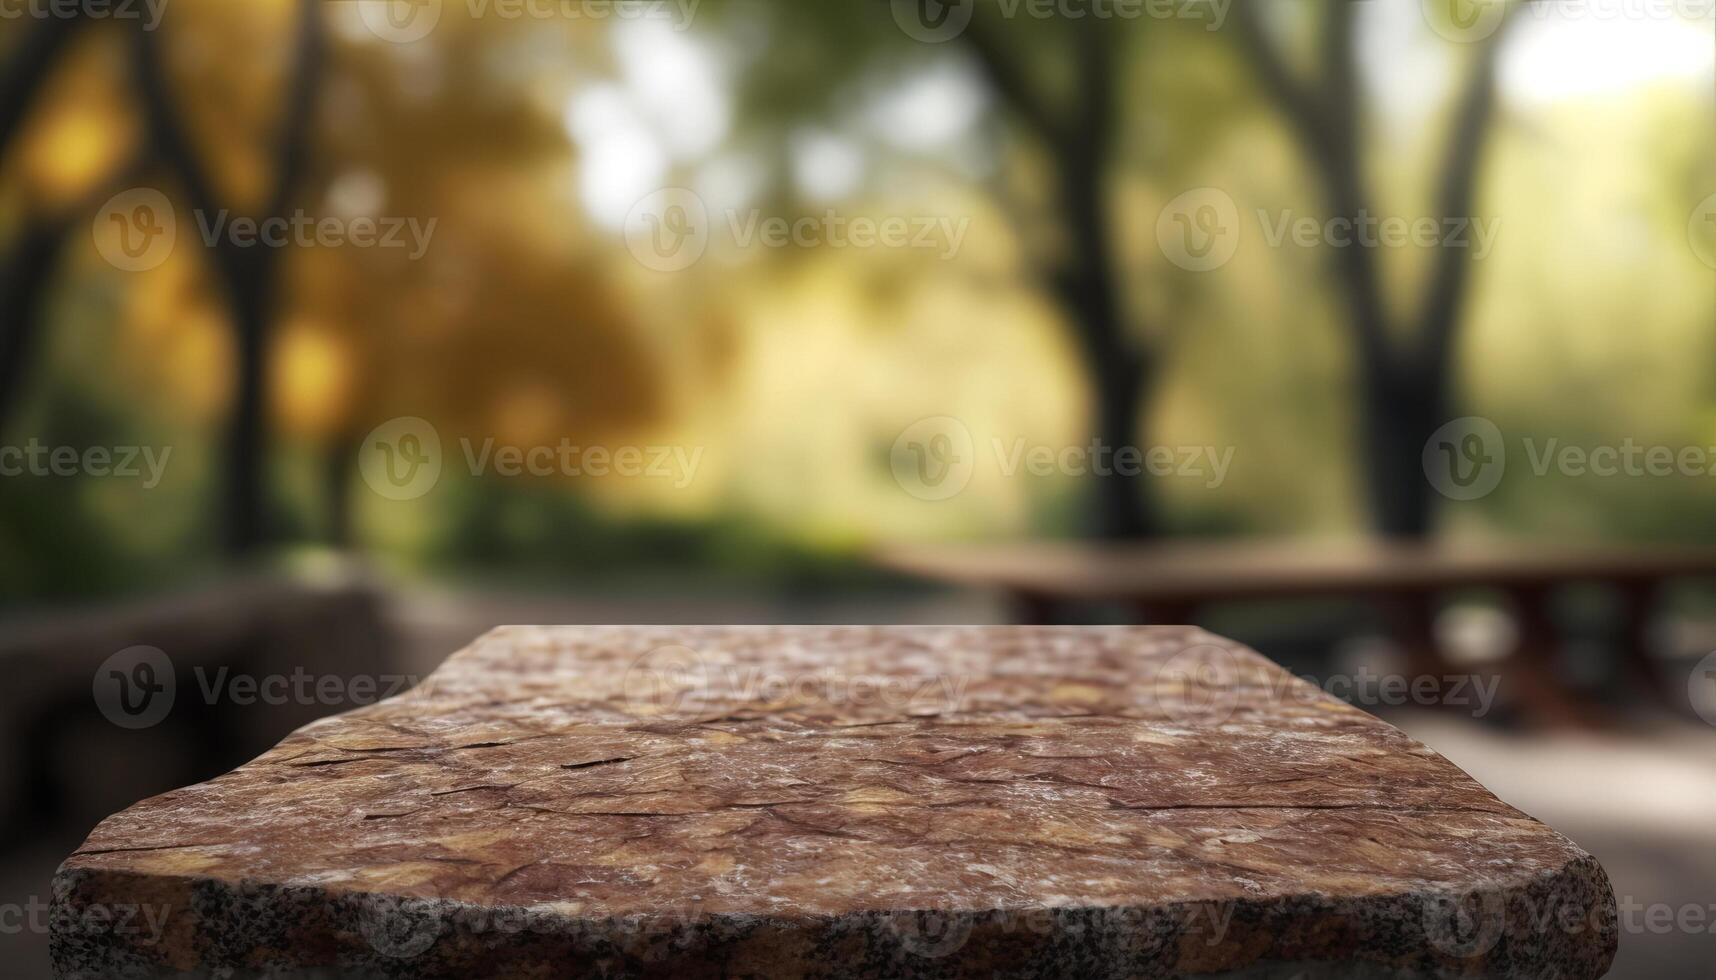 Stone board empty table in front of blurred background. perspective brown stone over blur trees in forest. photo